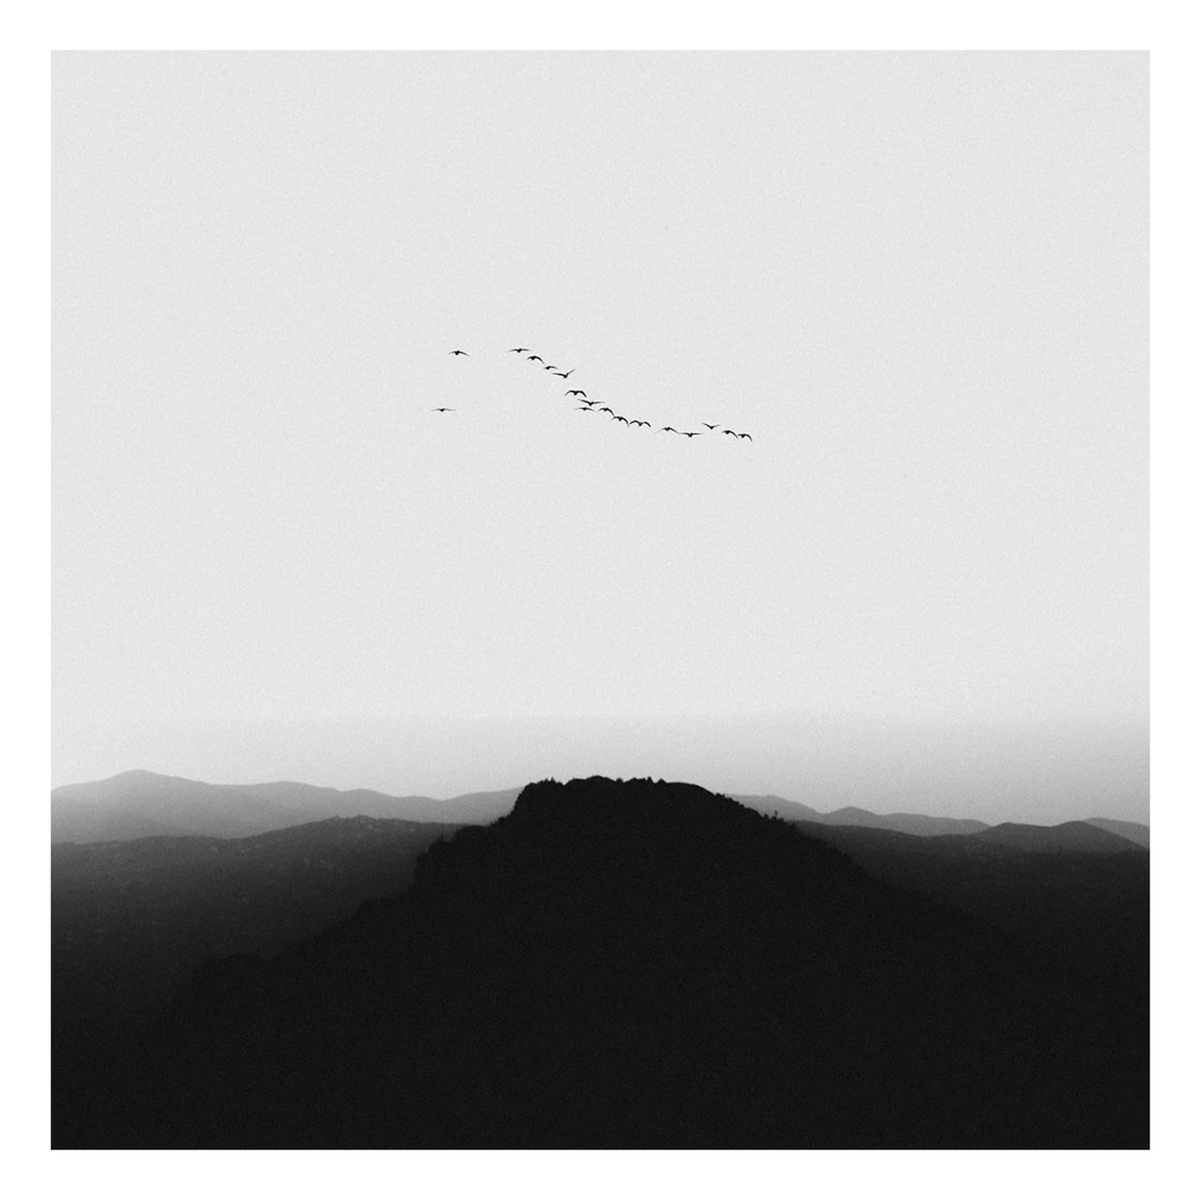 Learning to fly, Modern Photography, Black and White Print